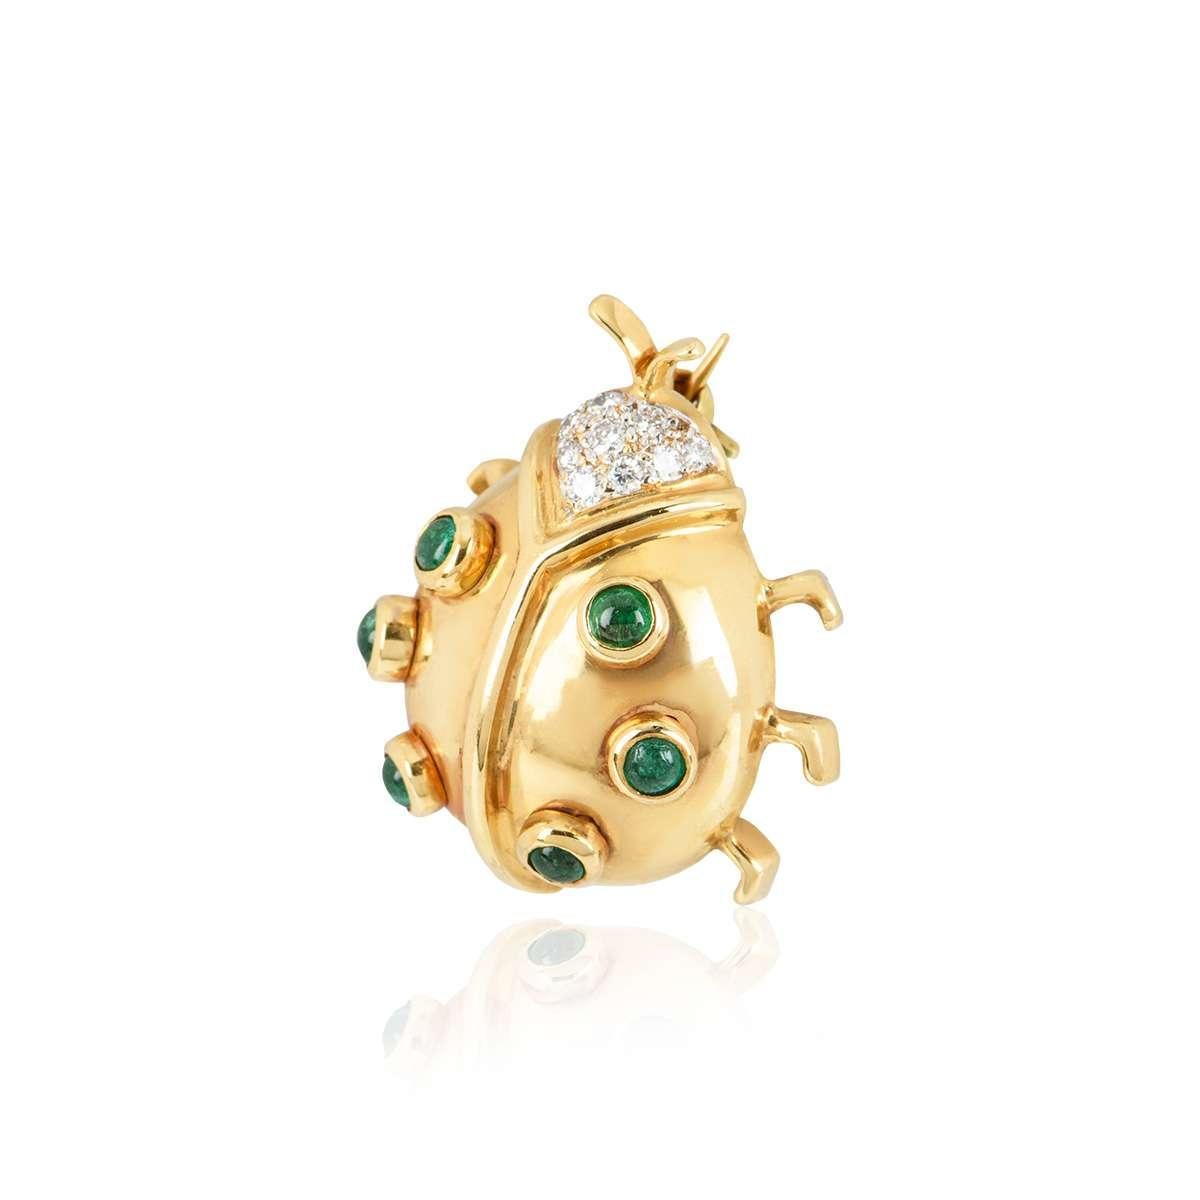 An 18k yellow gold Ladybird brooch. The brooch is set with 6 cabochon emeralds throughout the body and 10 round brilliant cut diamonds set in the head. The emeralds total approximately 0.30ct and the diamonds total approximately 0.12ct. The